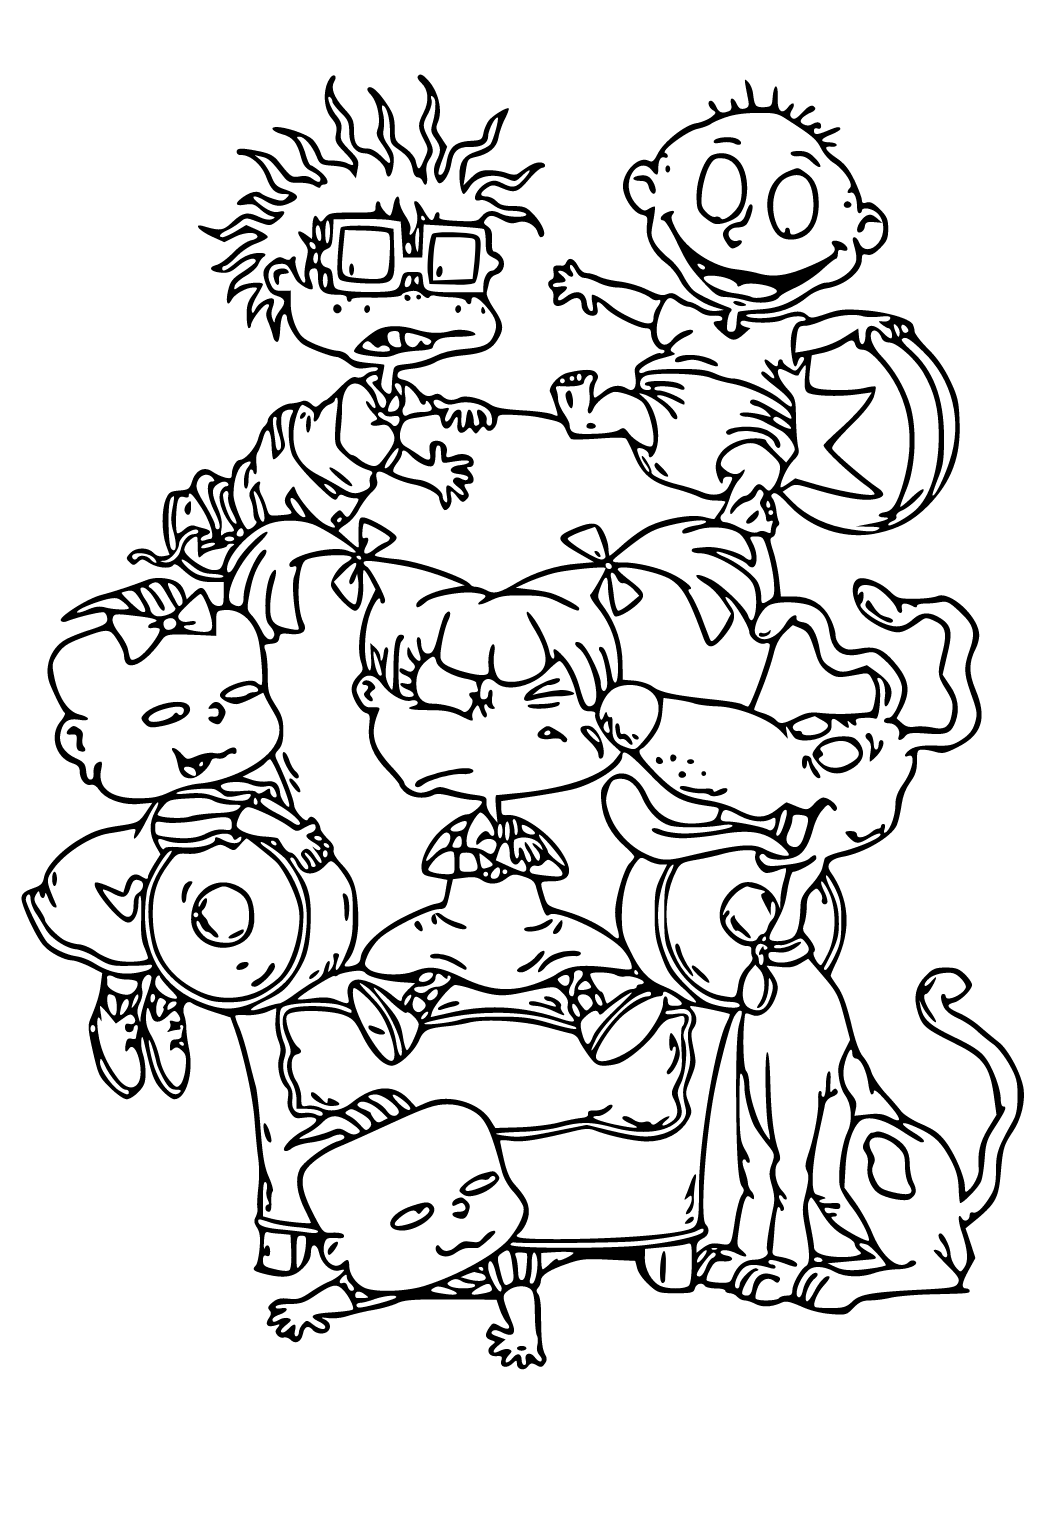 Free printable rugrats characters coloring page for adults and kids